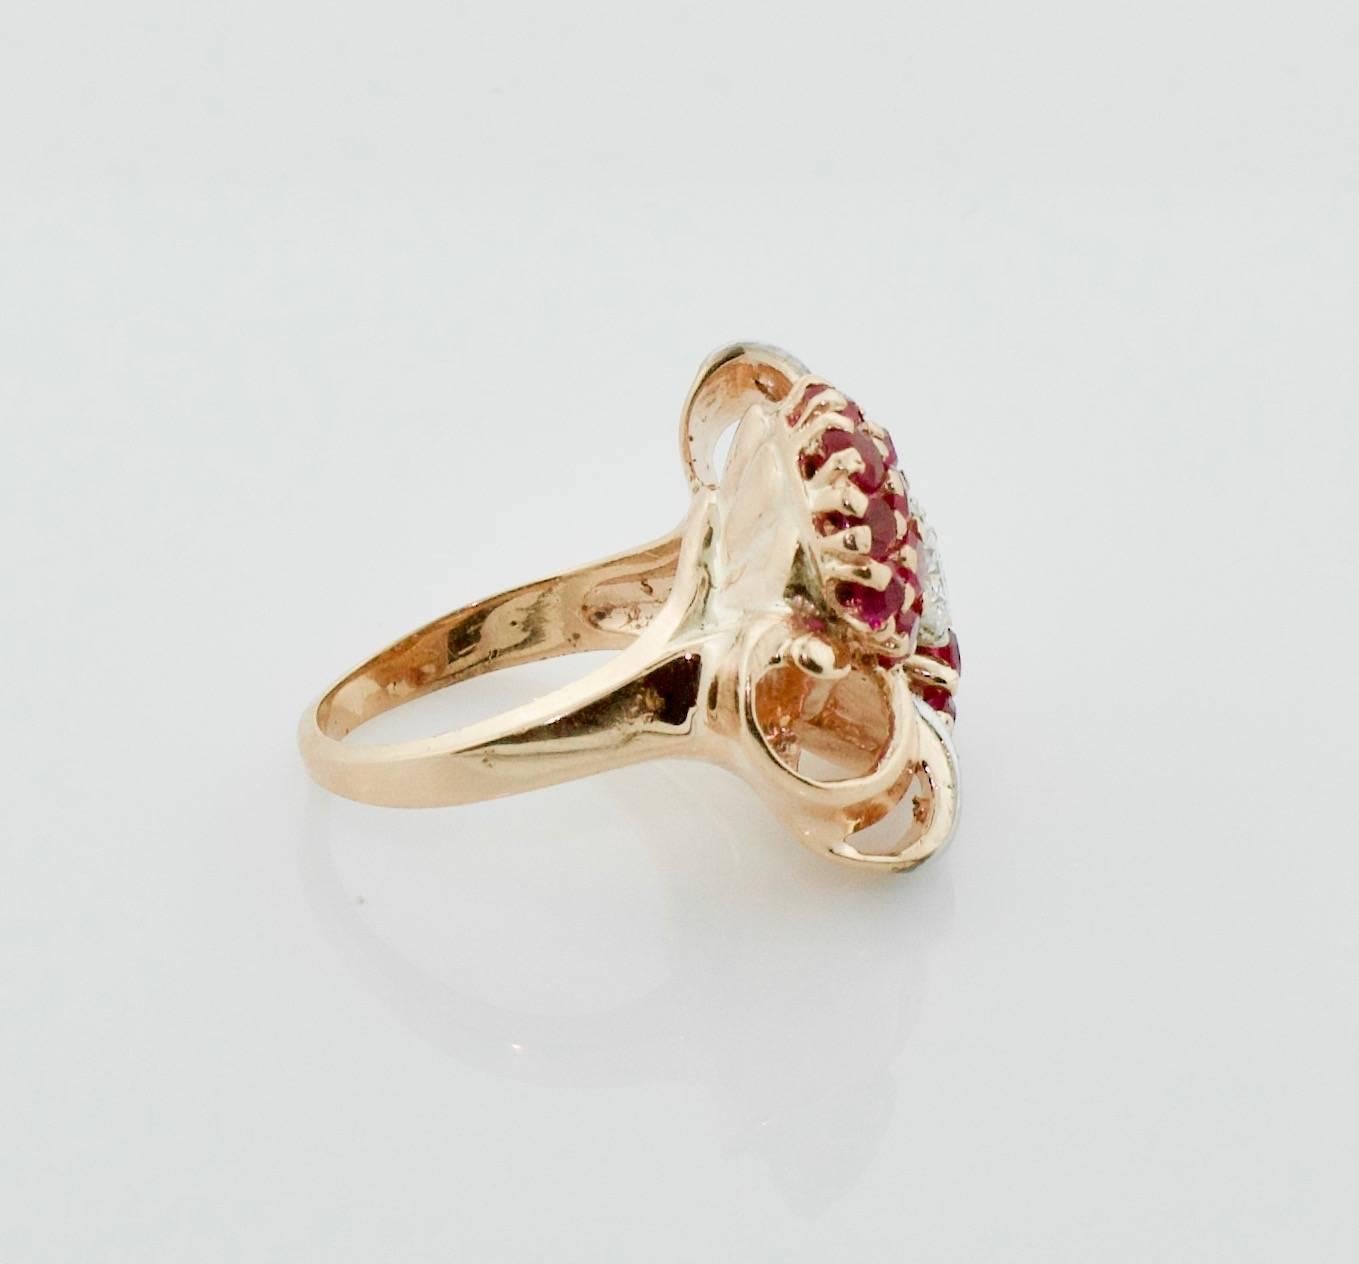 Women's or Men's Retro 1940s Ruby and Diamond Ring in Rose Gold and Platinum